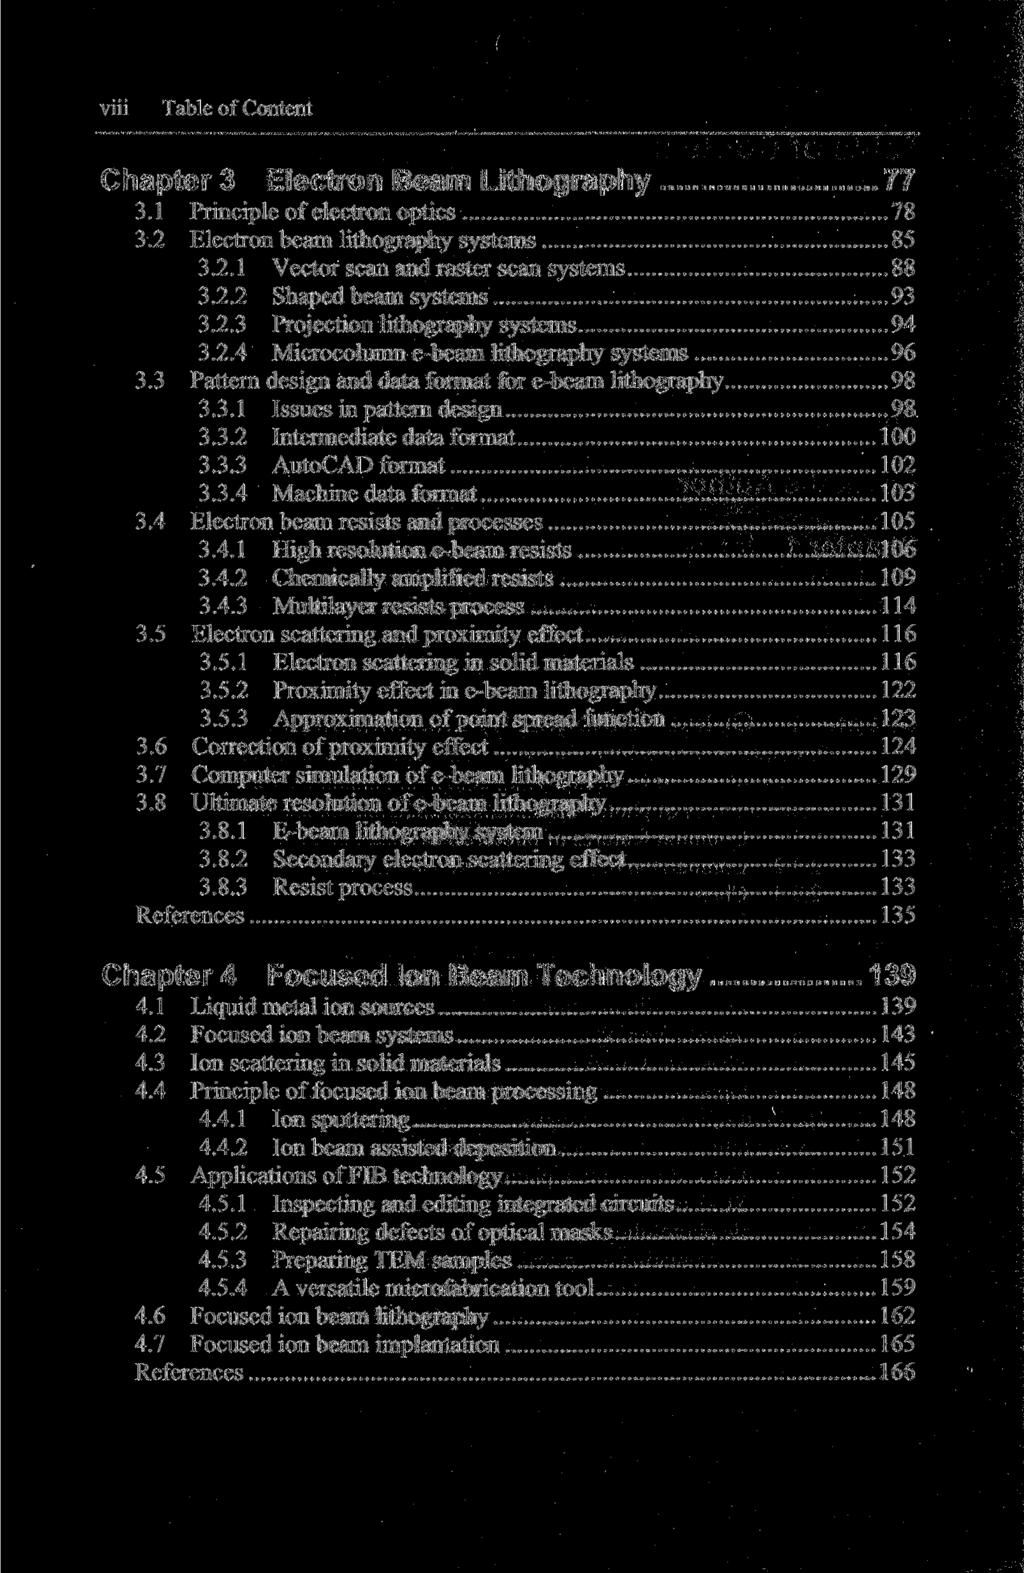 viii Table of Content Chapter 3 Electron Beam Lithography 77 3.1 Principle of electron optics 78 3.2 Electron beam lithography Systems 85 3.2.1 Vector scan and raster scan Systems 88 3.2.2 Shaped beam Systems 93 3.